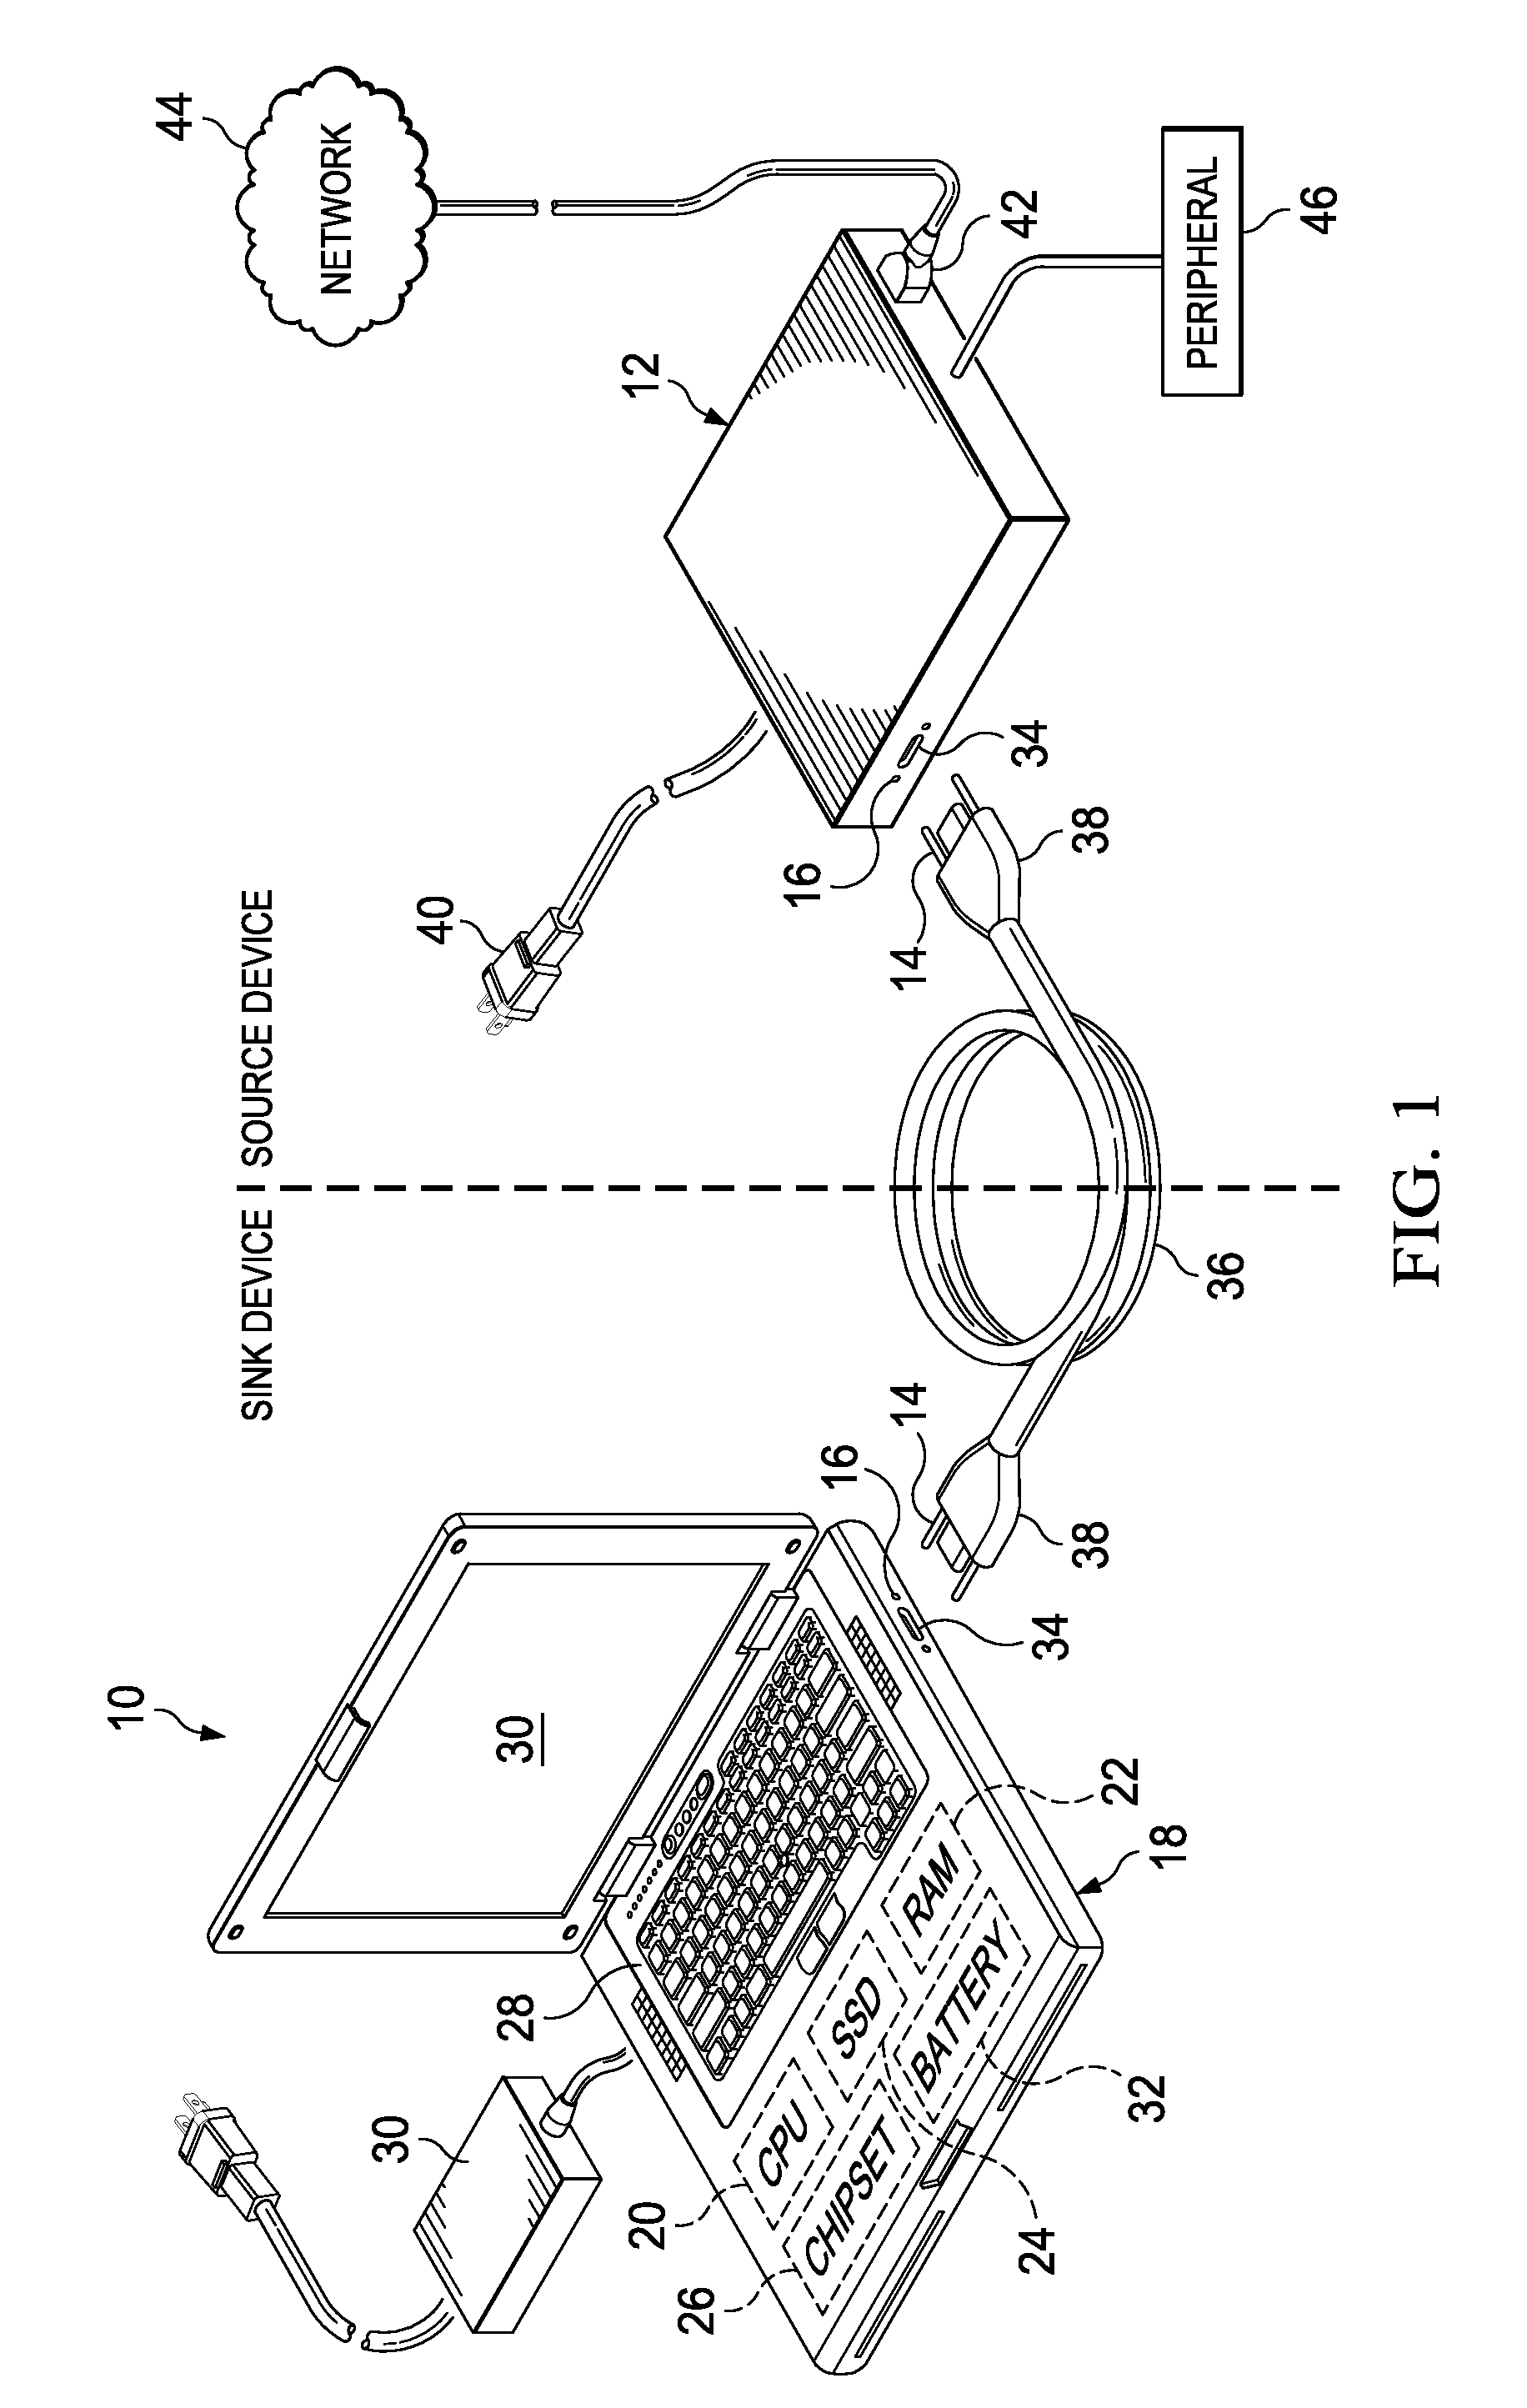 Information Handling System Multi-Purpose Connector Guide Pin Structure